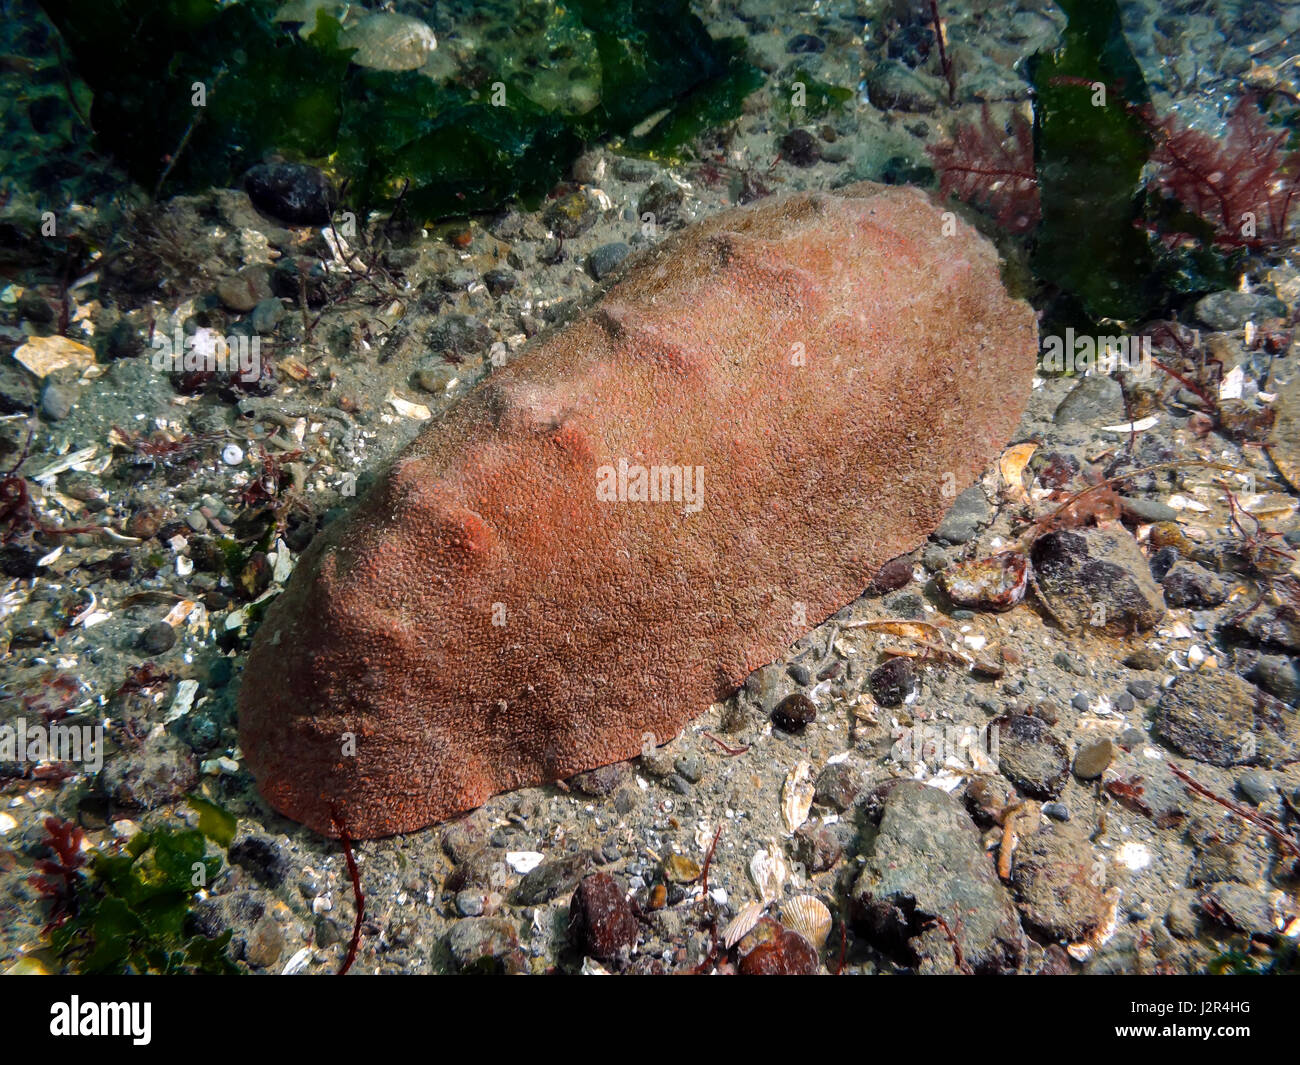 A Gumboot Chiton (Cryptochiton stelleri) also known as a Giant Western Firey Chiton photographed while scuba diving in Southern British Columbia, Cana Stock Photo